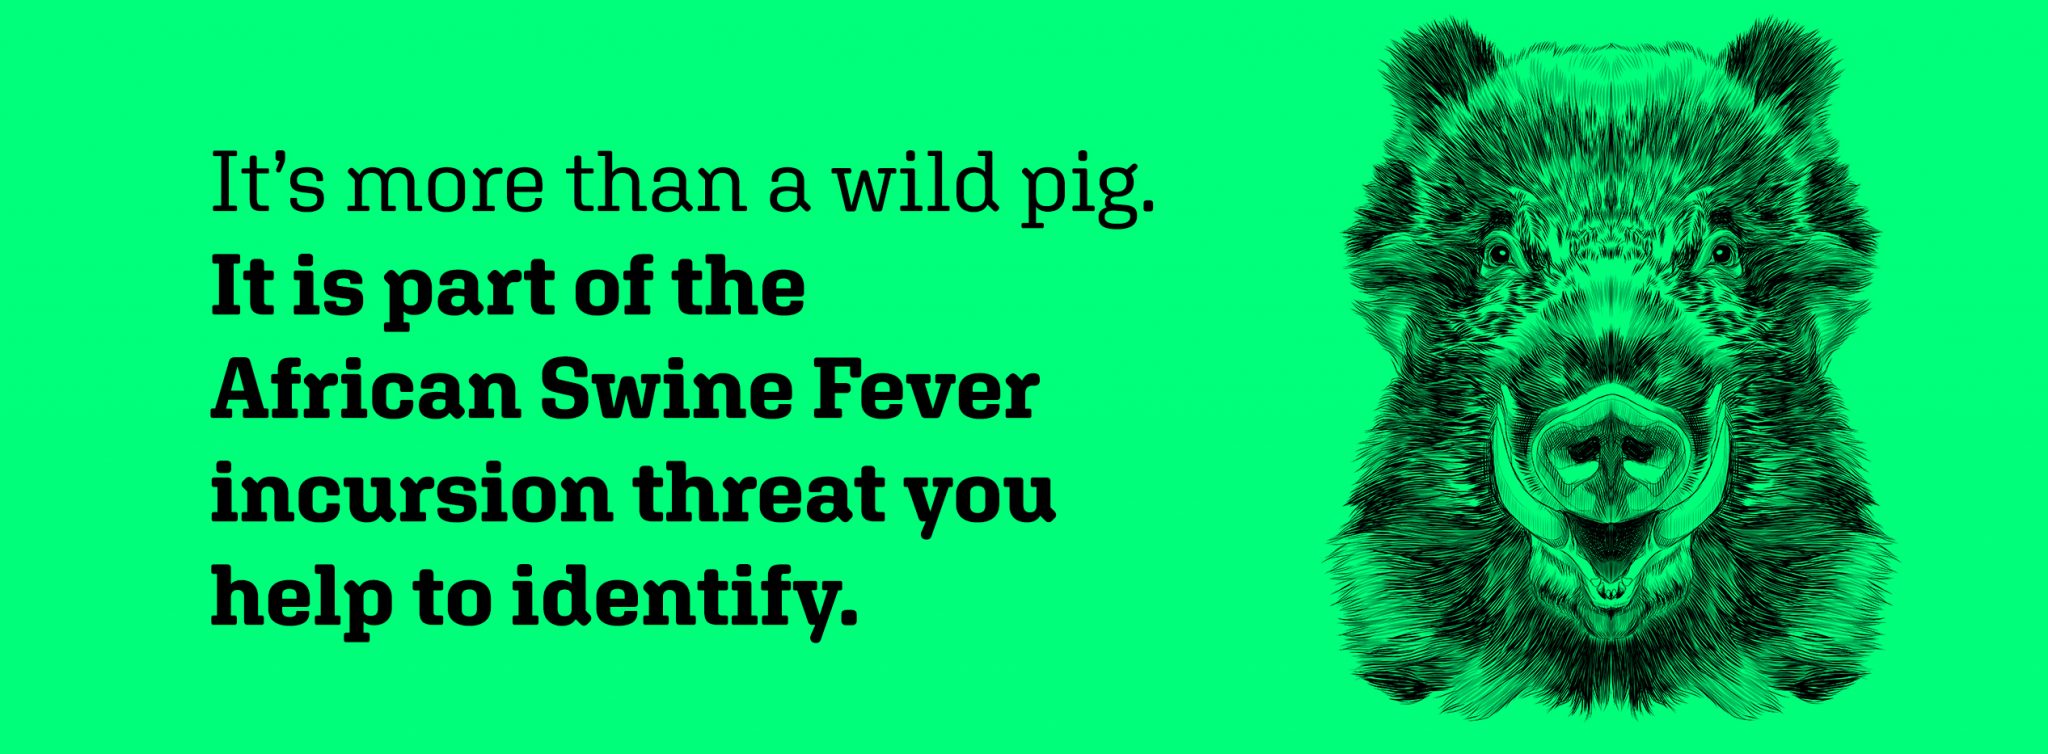 It's more than a wild pig. It is part of the african Swine Fever incursion threat you help to identify.